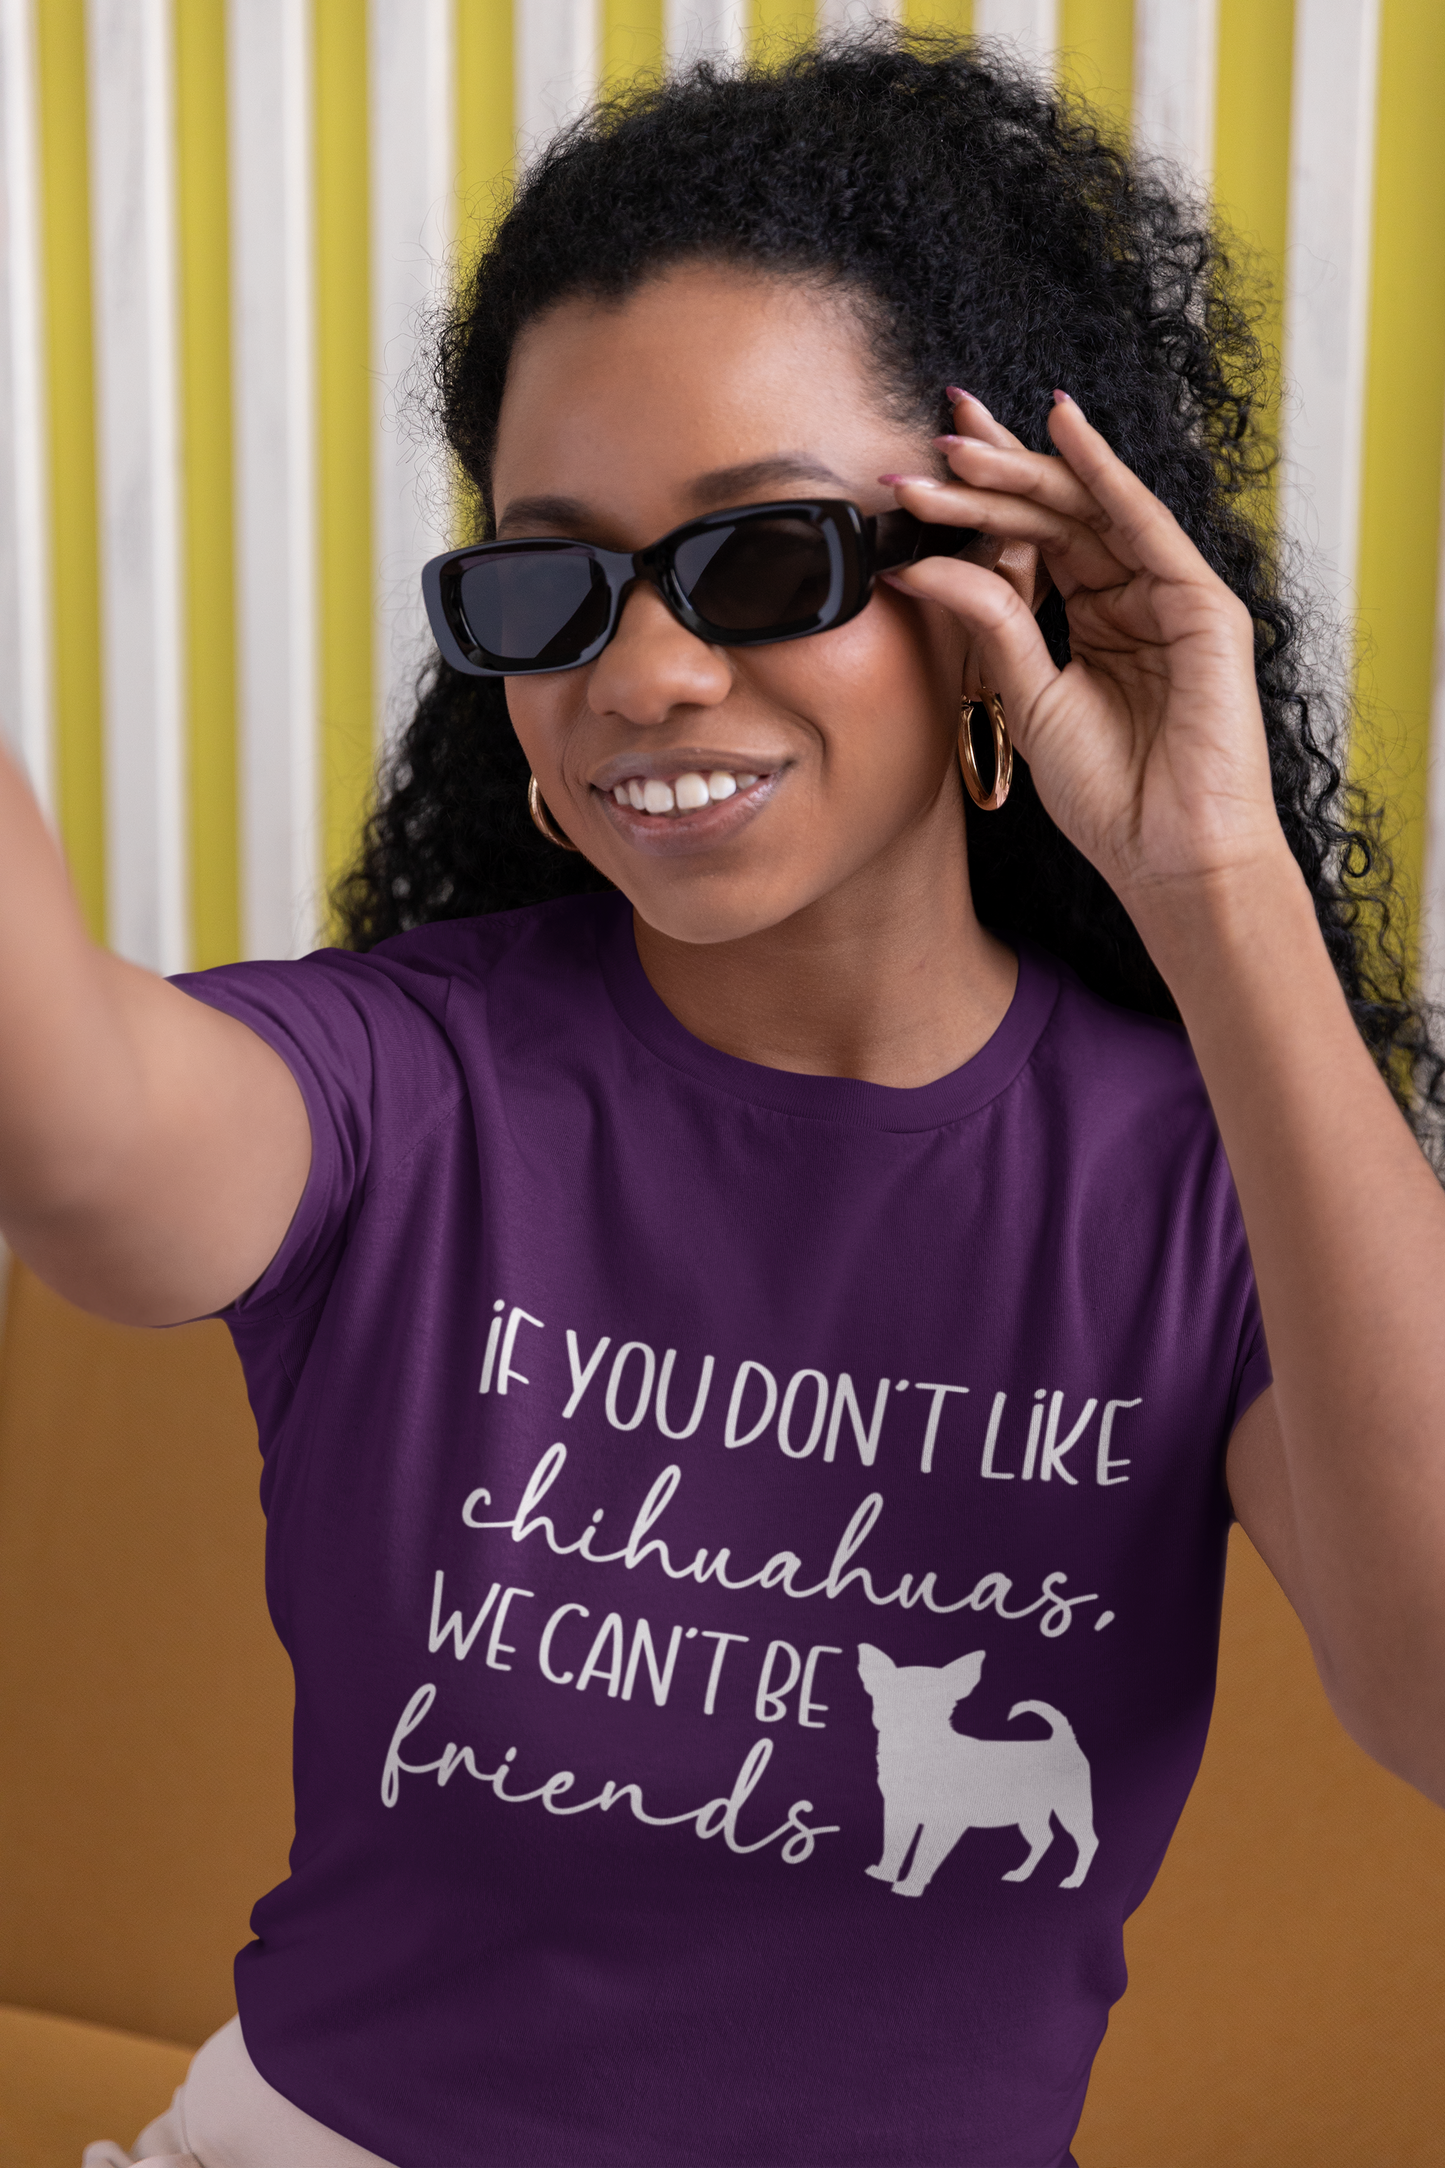 Lady wearing we can't be friends t-shirt